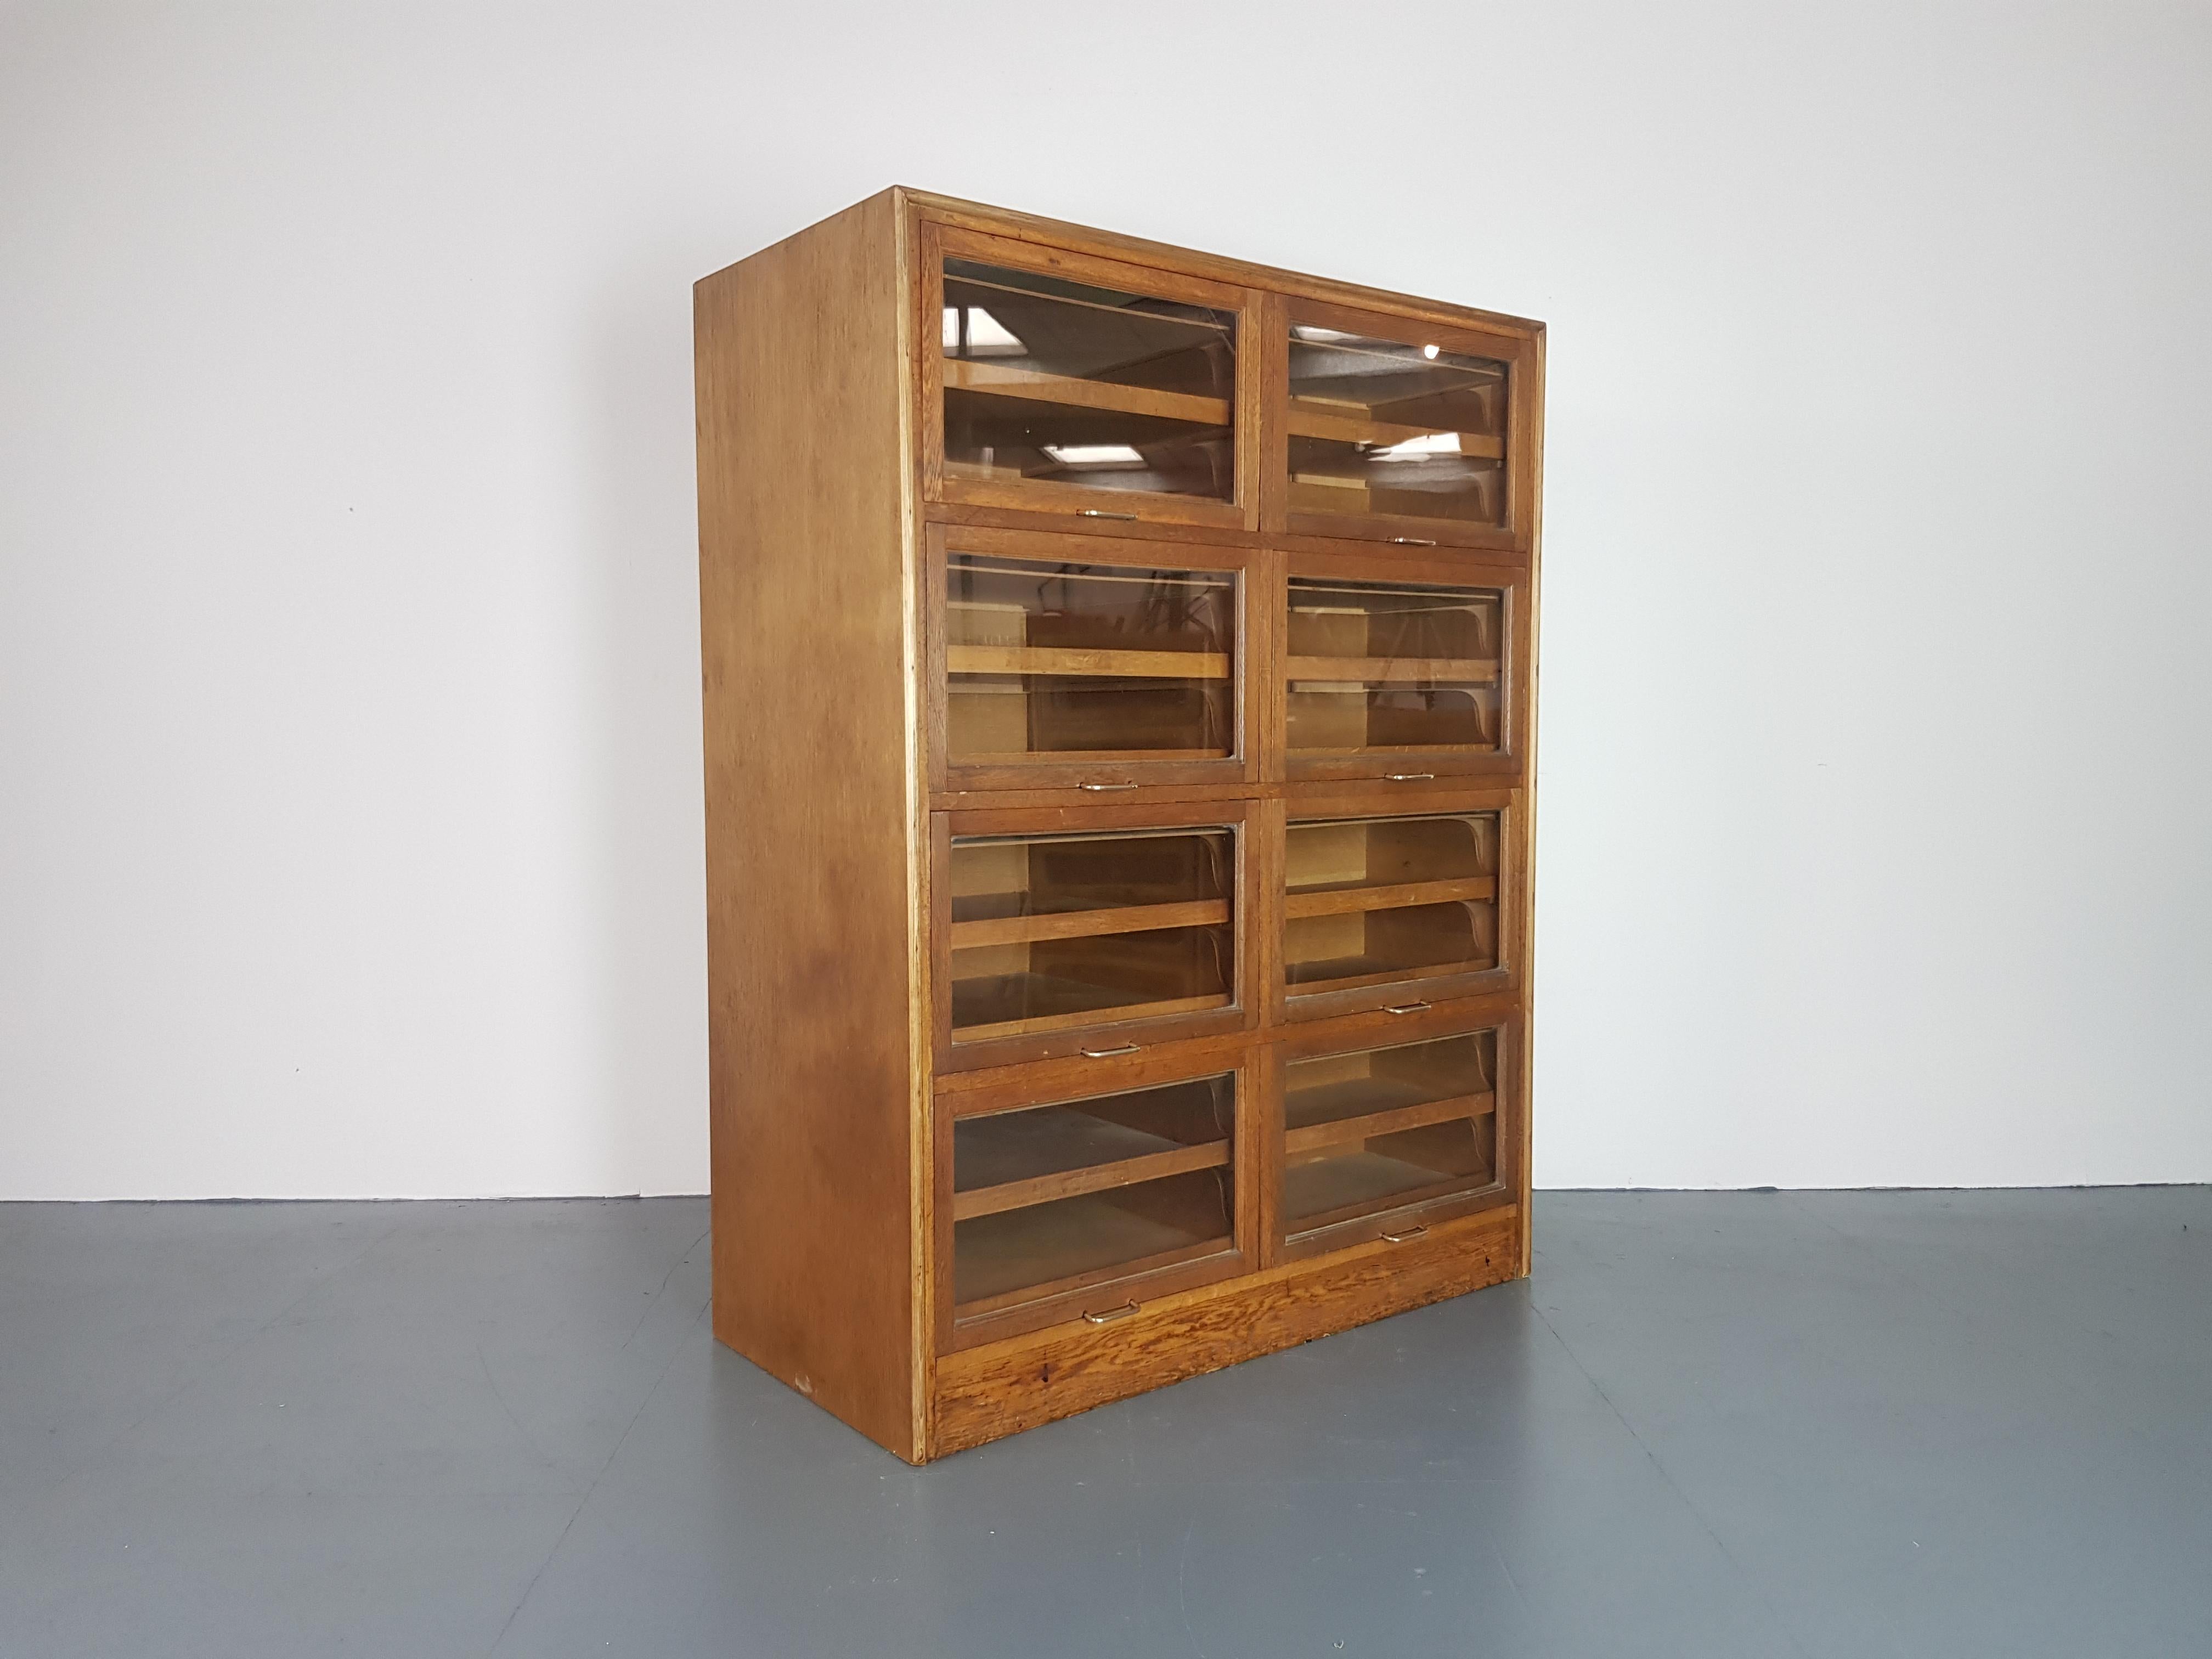 Very lovely 8 section haberdashery cabinet from the early part of the last century.  Each section has glass fronted up and over doors, with 2 pull out wooden drawers in each.  
In good vintage condition. Some scuffs here and there, as to be